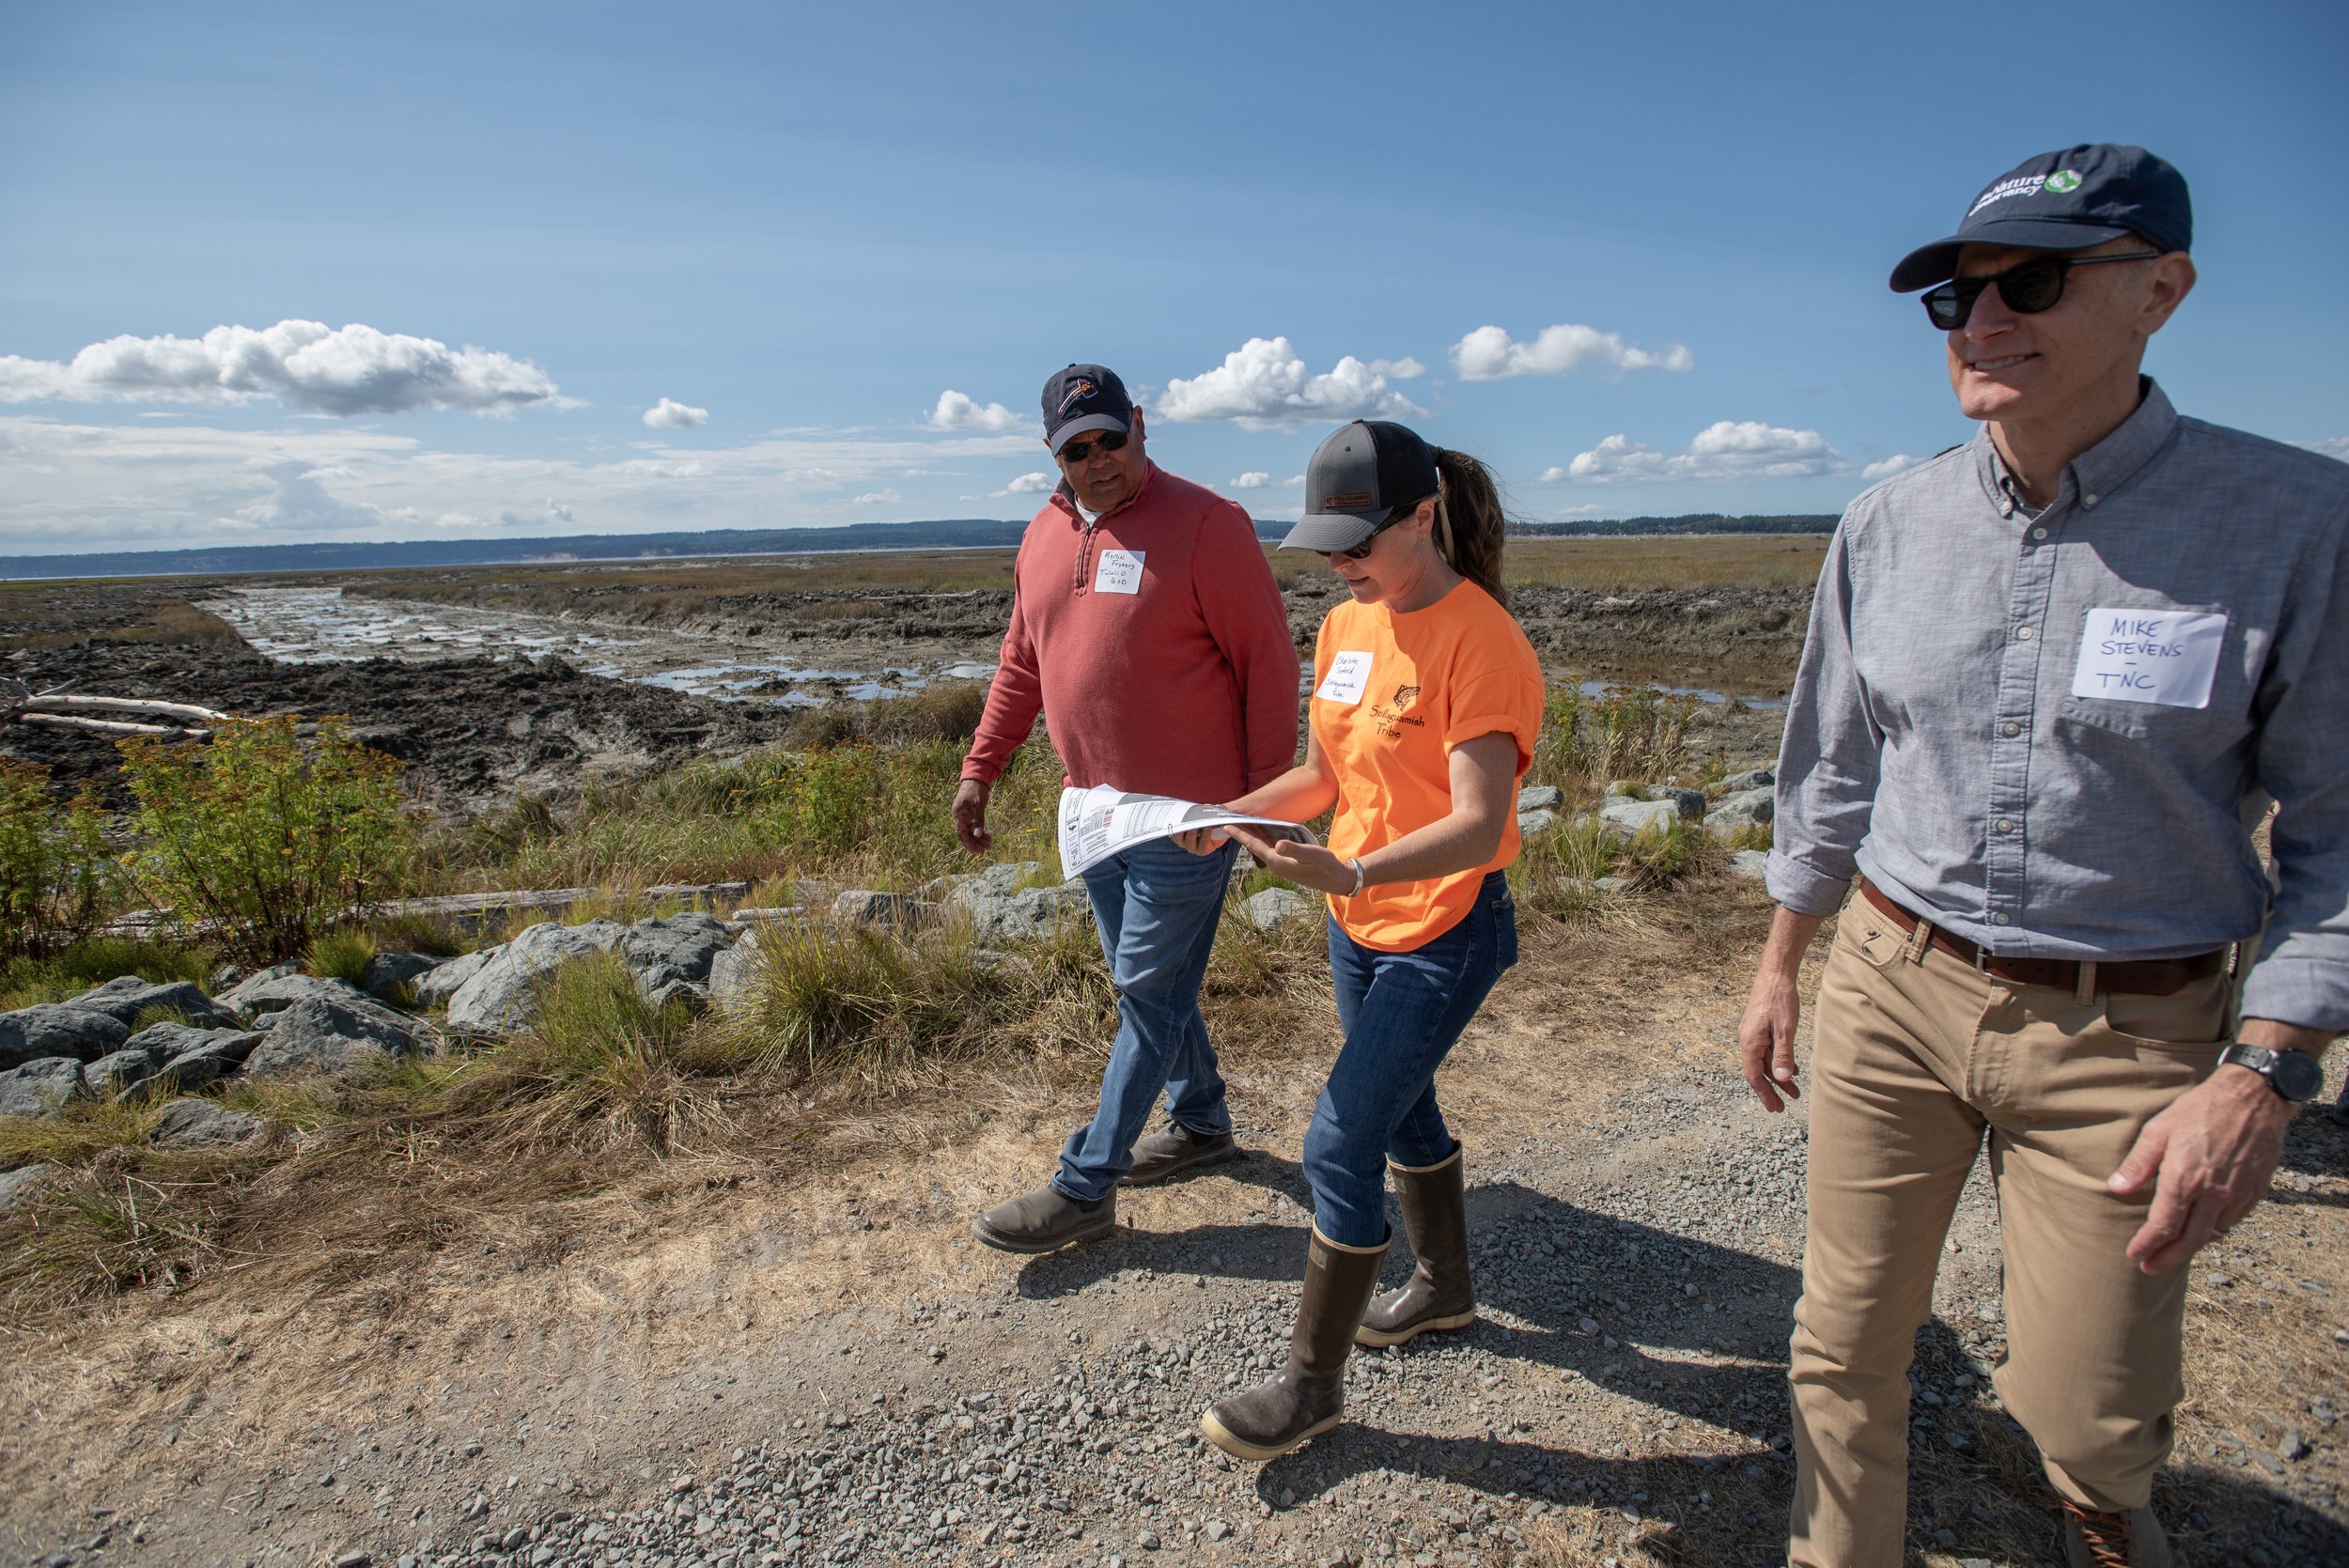  Tulalip Tribal Councilmember Marlin Fryberg Jr, Charlotte Scofield Fisheries Biologist for the Stillaguamish Tribe, and TNC Washington state director Mike Stevens walk along the estuary talking about the restoration plans. © Hannah Letinich/TNC 